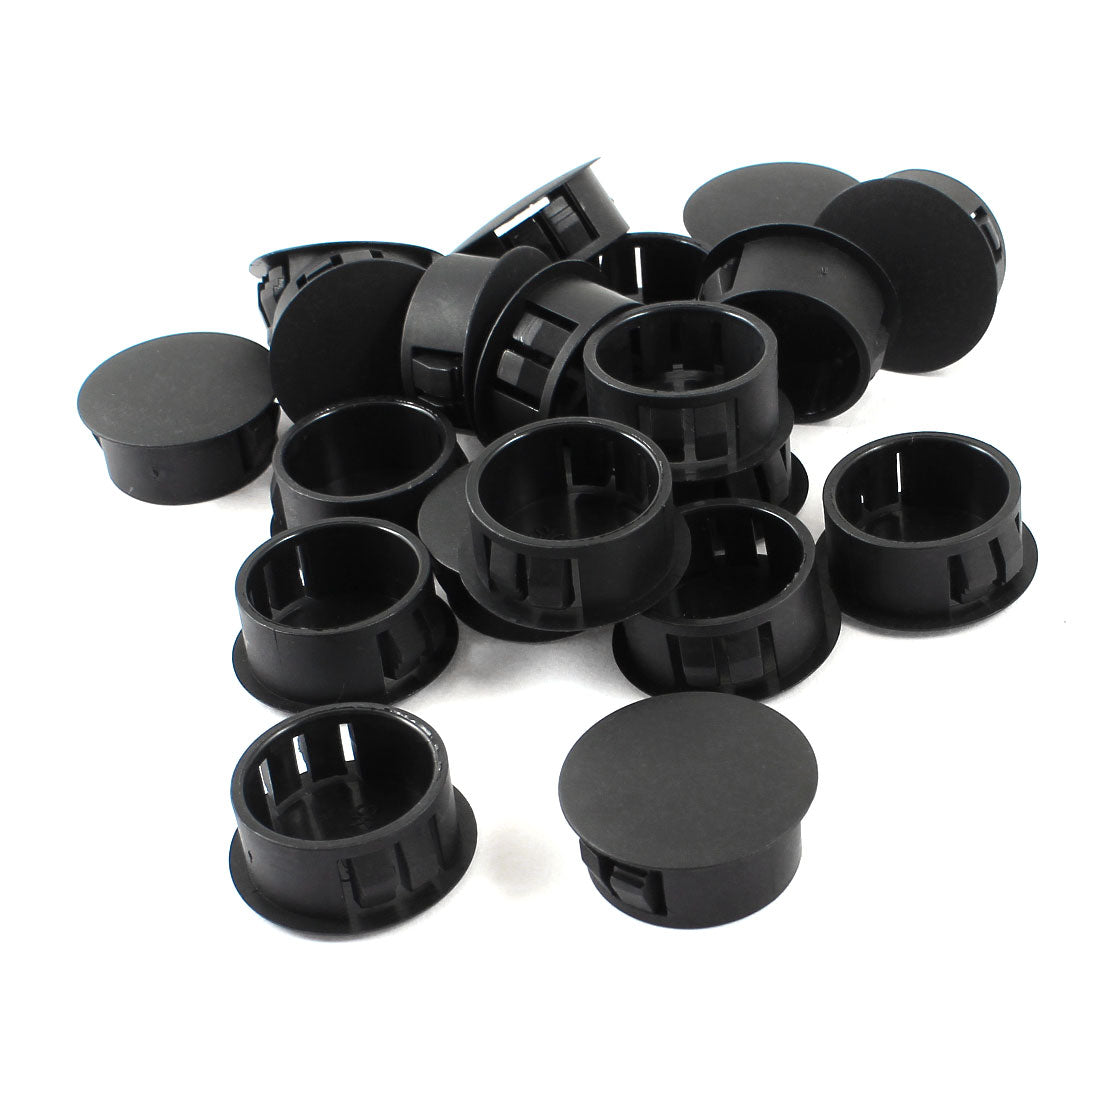 uxcell Uxcell 20pcs Black Plastic 10mm Diameter Snap in Type Locking Hole Button Cover 10mm x 13mm x 10mm